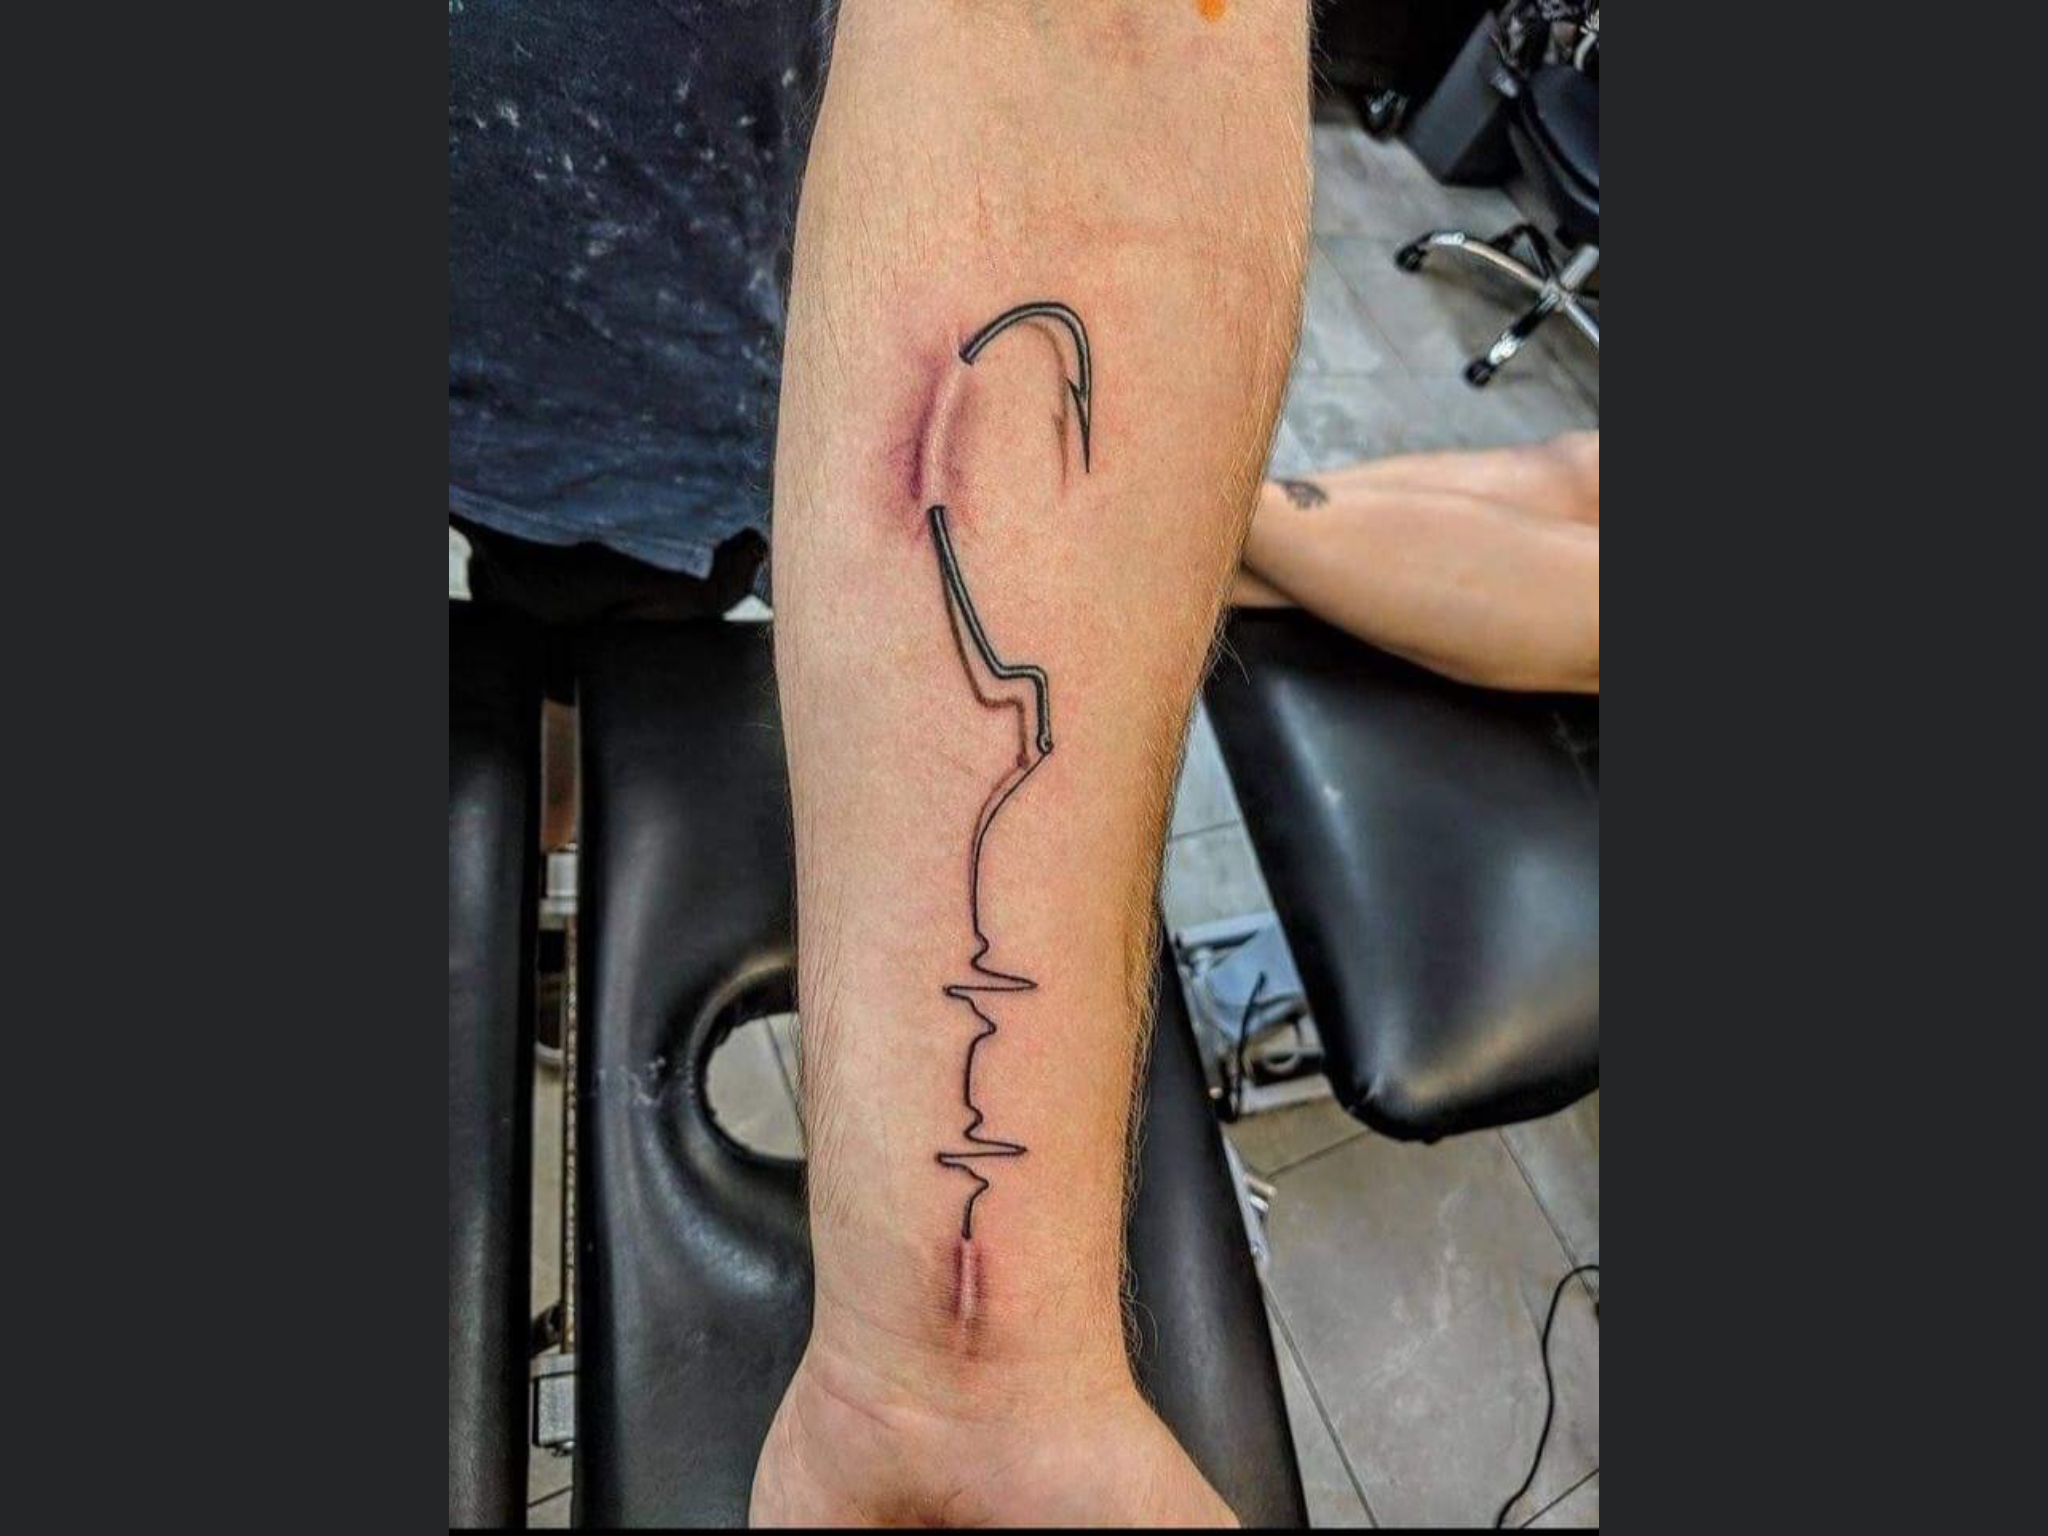 Another tattoo?  Fly Fishing Forum